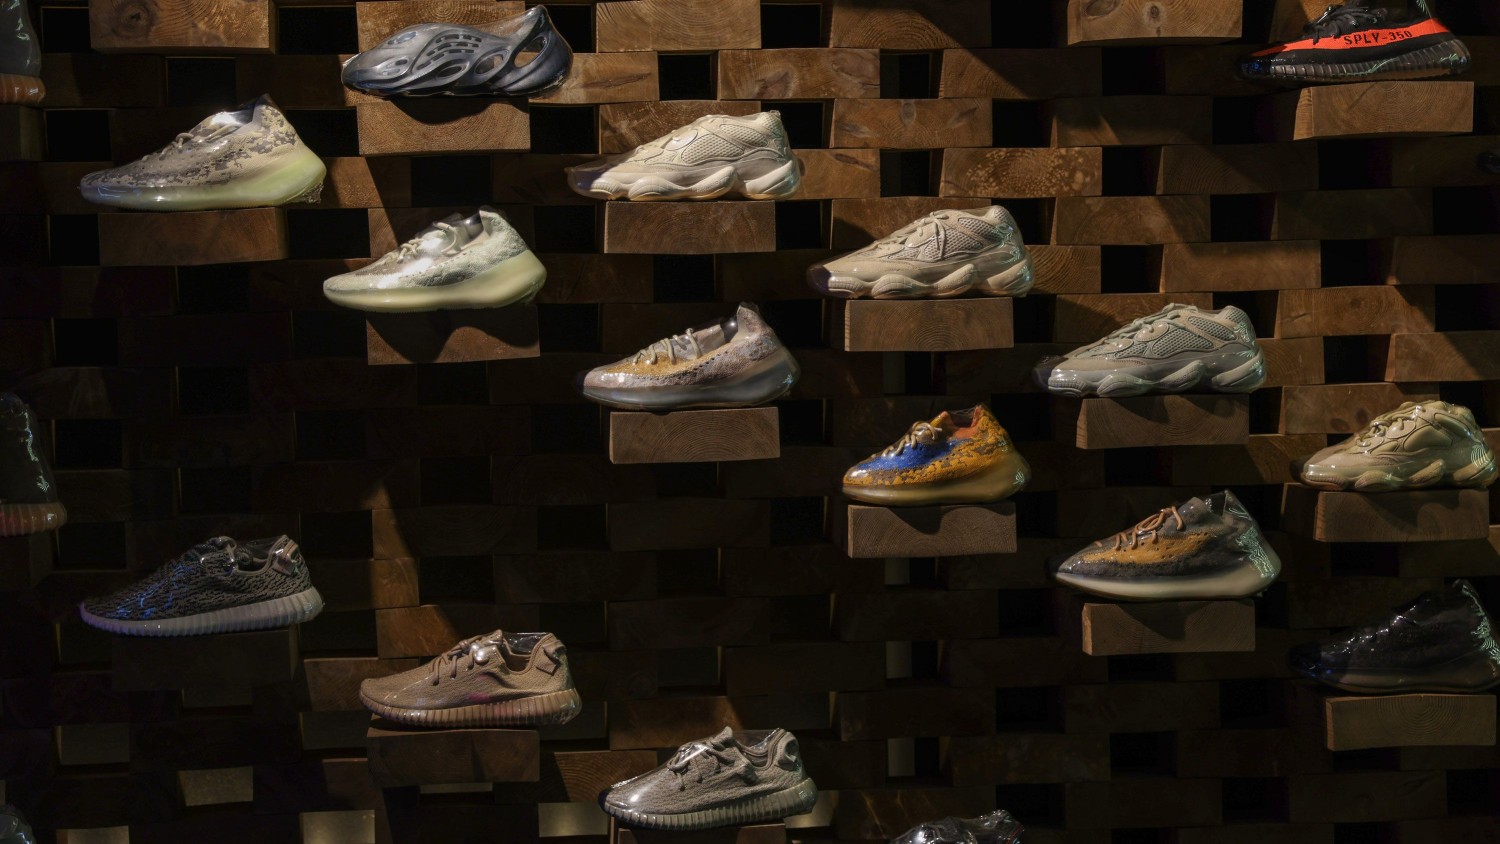 Adidas Yeezy trainers inside the Presented By sneaker resale store in London, pictured in August 2021. Hollie Adams/Bloomberg via Getty Images